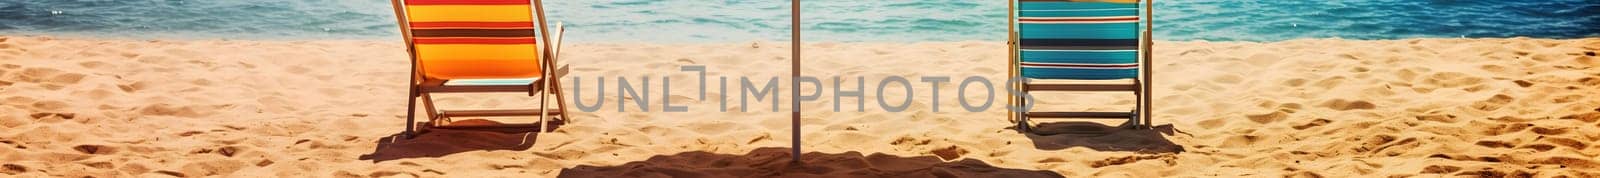 Beach umbrella with chairs on the sand beach - summer vacation theme header, neural network generated art by z1b